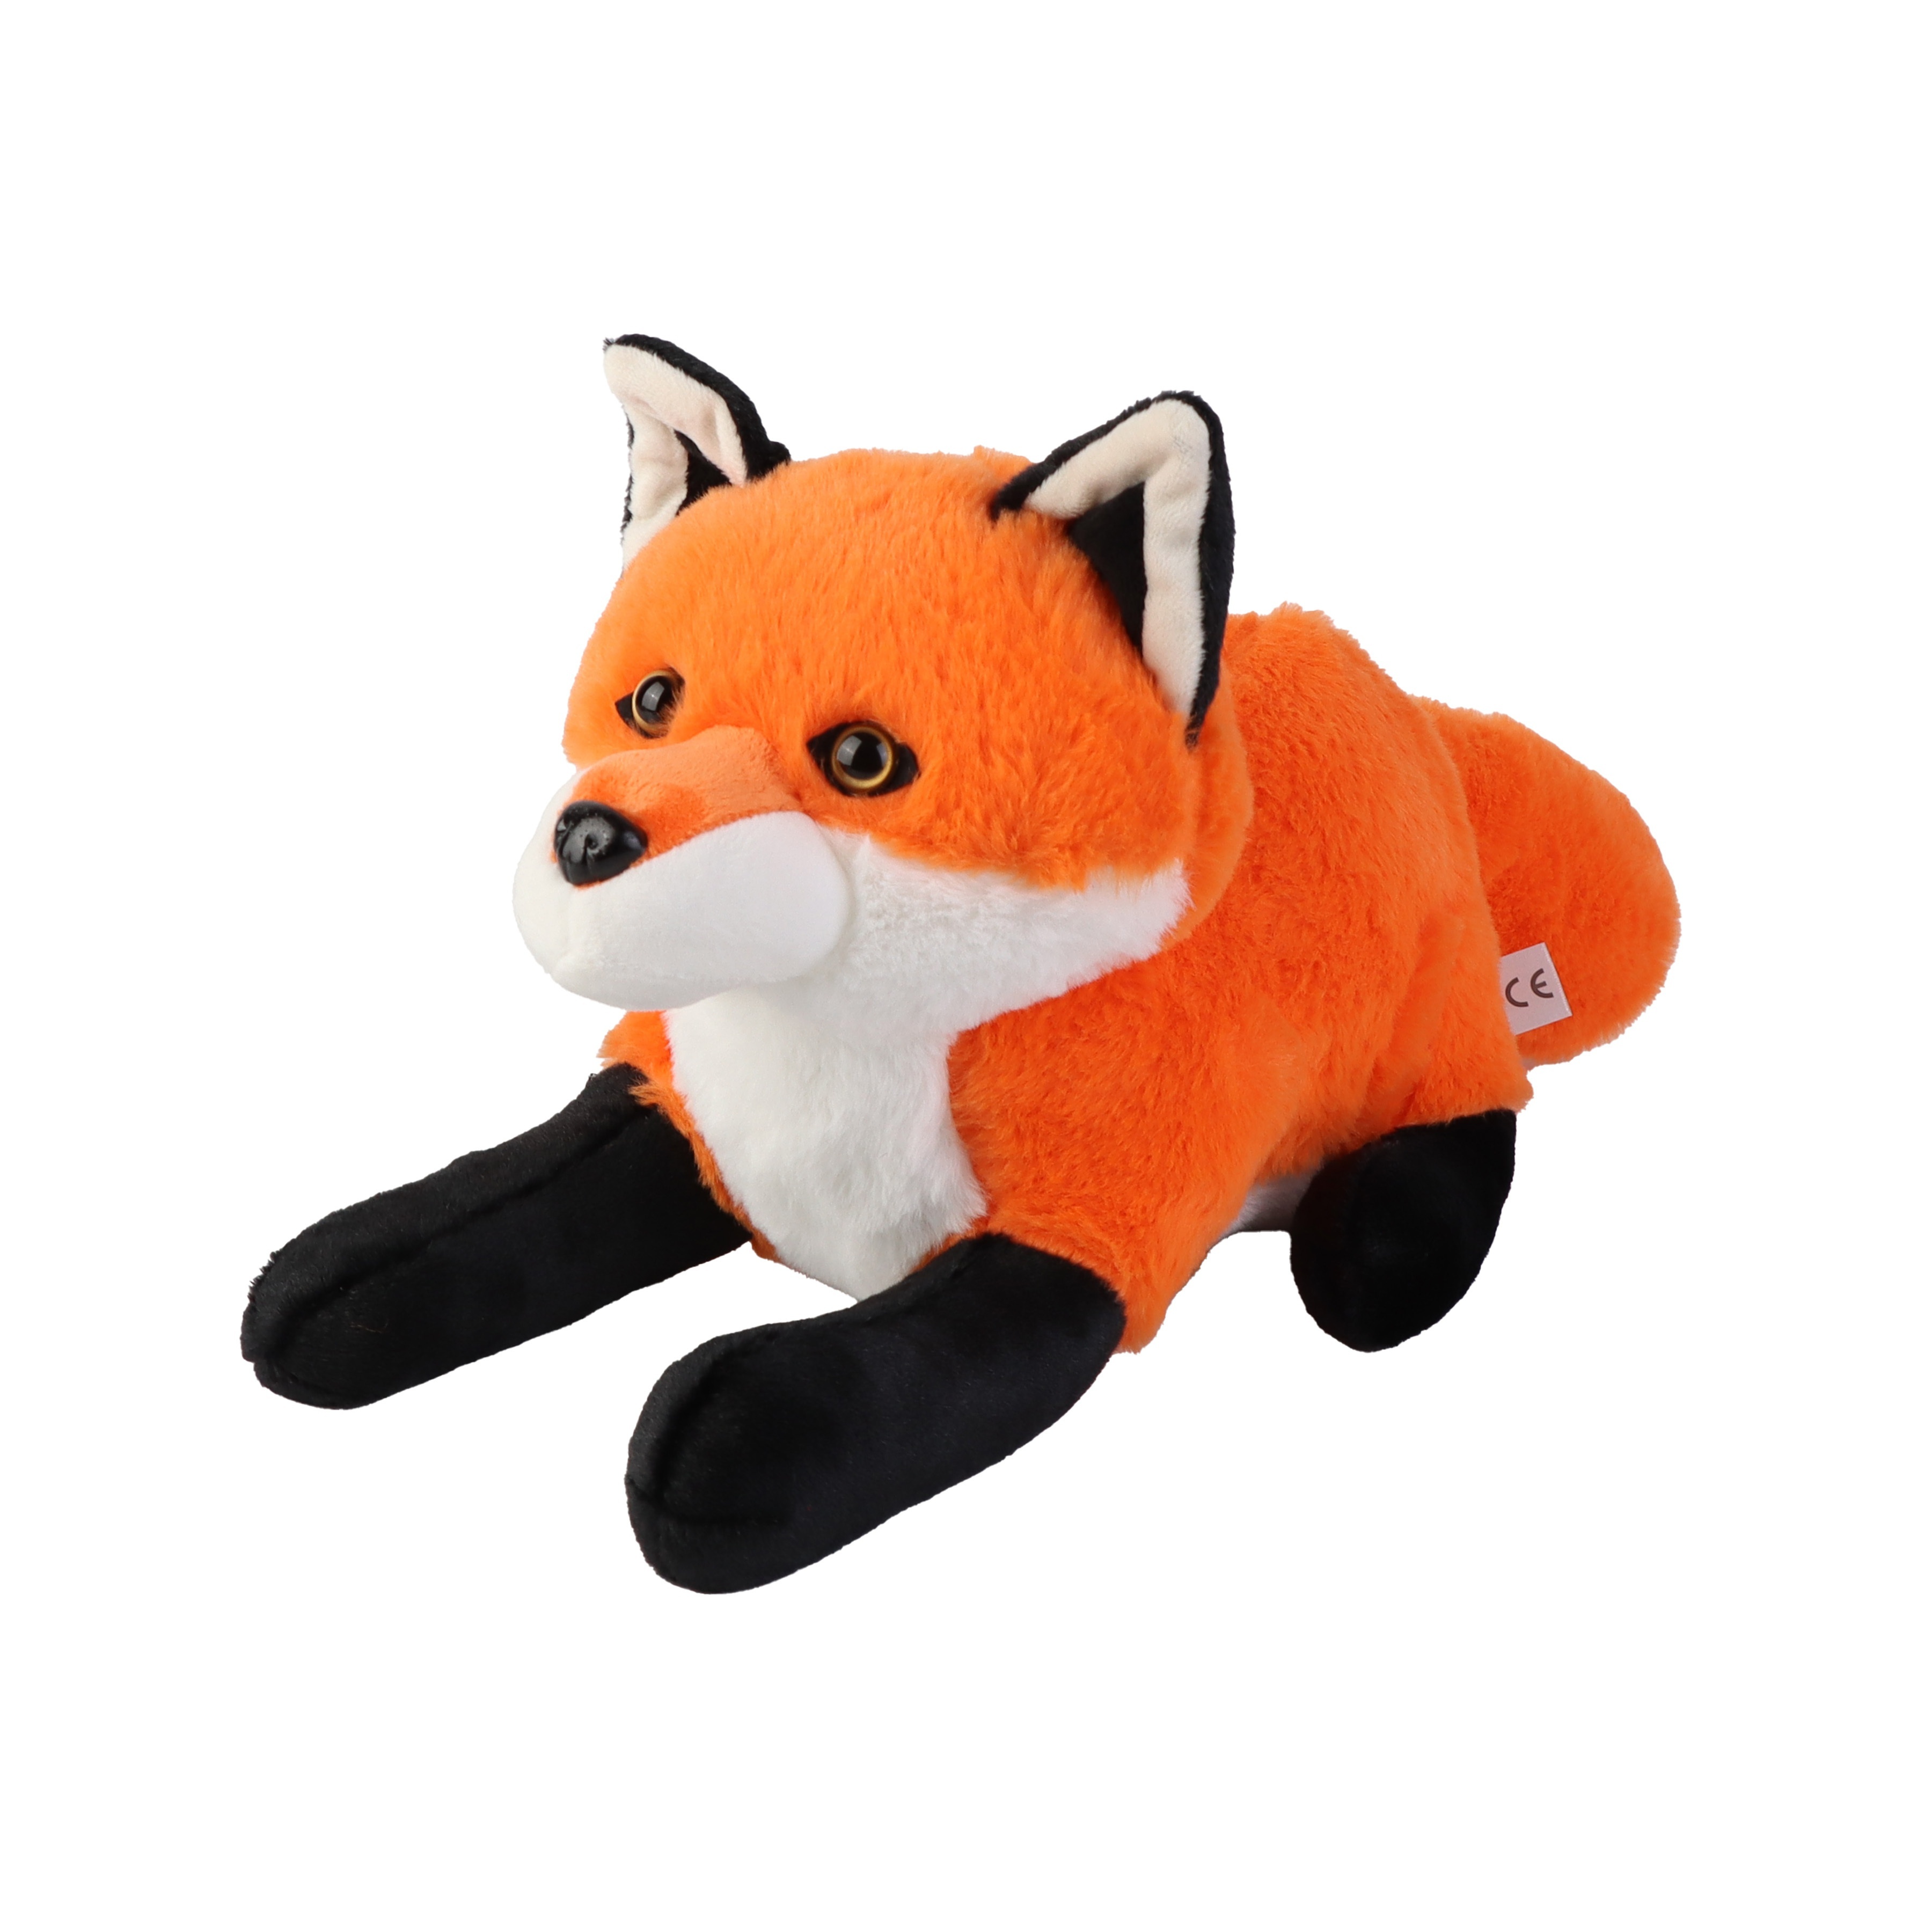 Fox Plush Filled Doll Nine Tailed Fox Grow Tail Plush Creative Spoof Pillow  Sofa Decoration Toys For Kids Girl Xmas Gifts